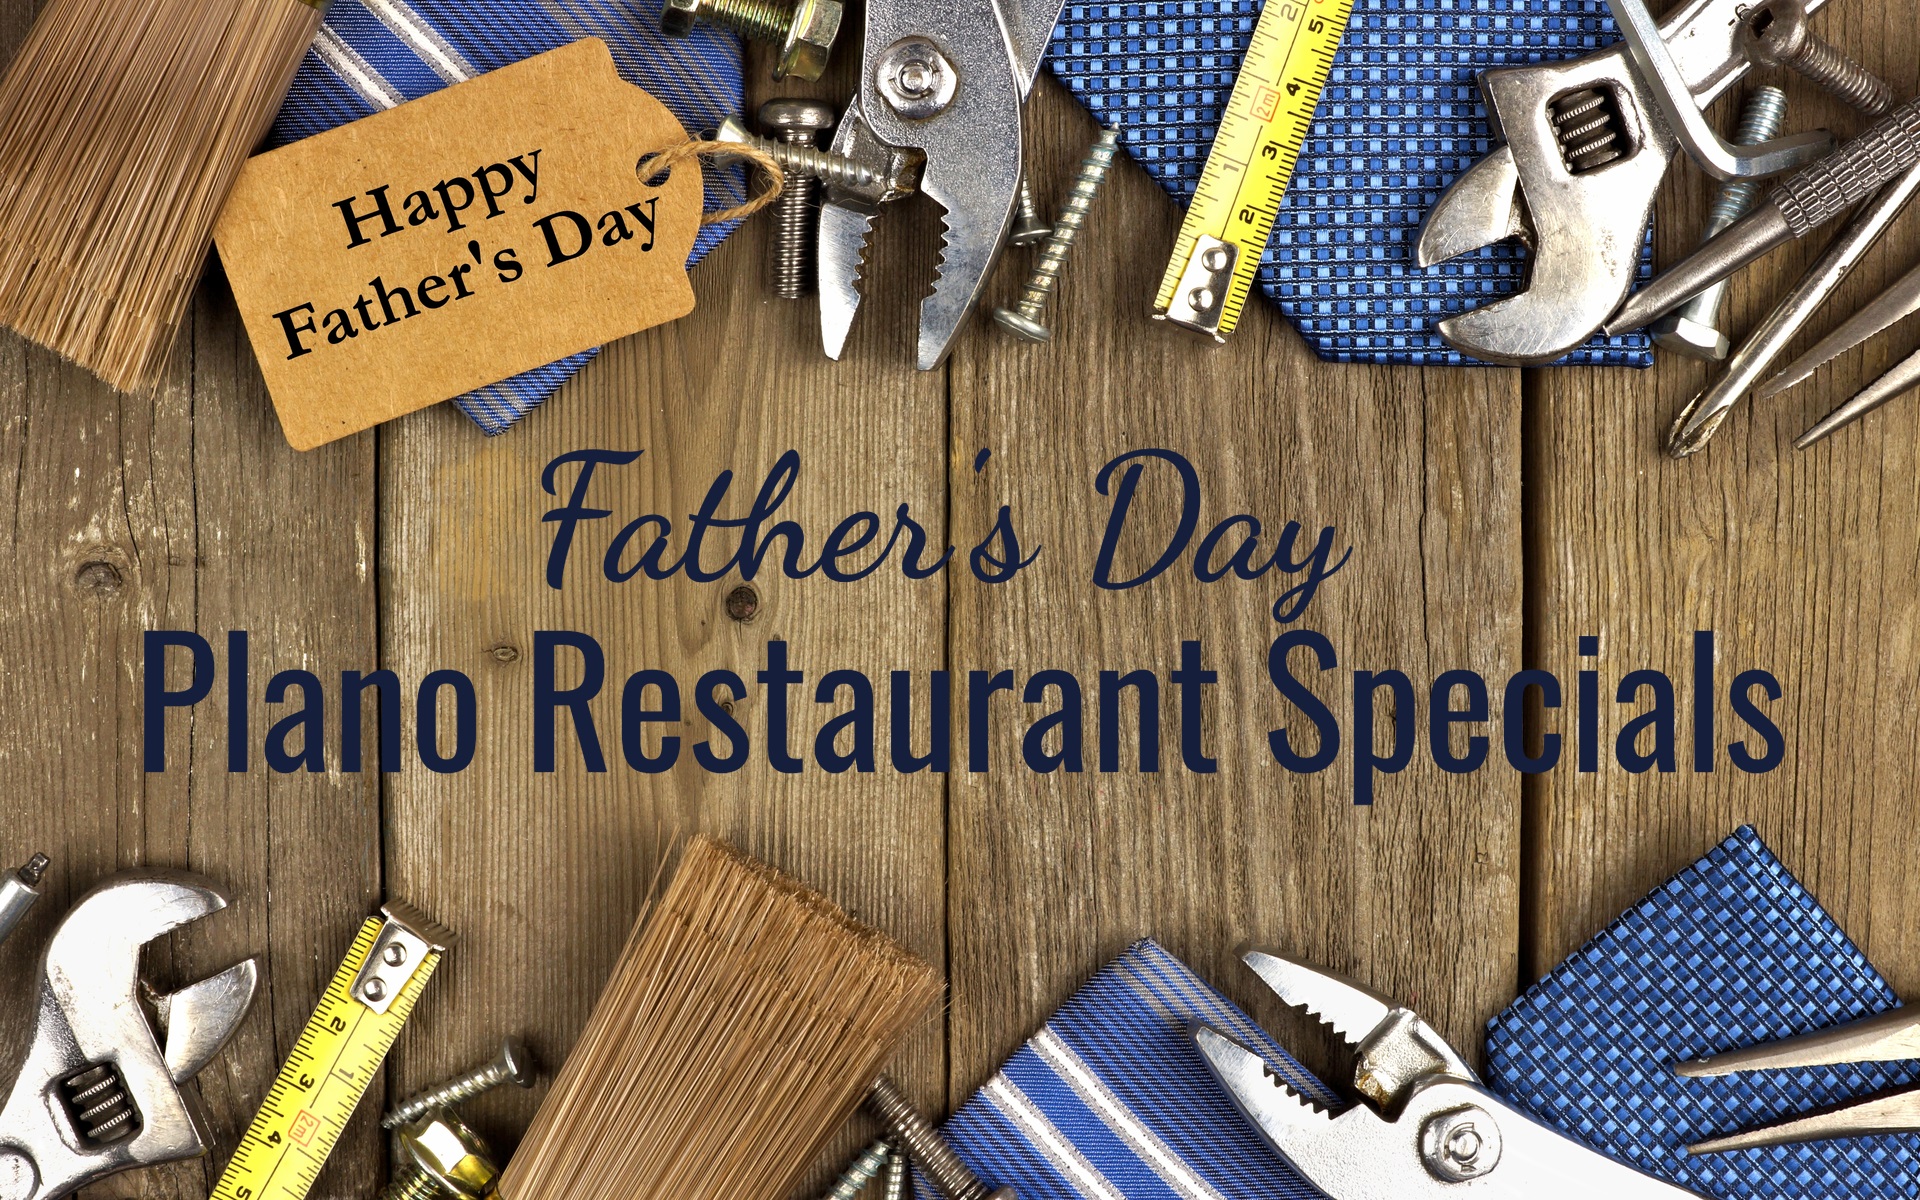 Father's Day Plano restaurant specials with ties and tools